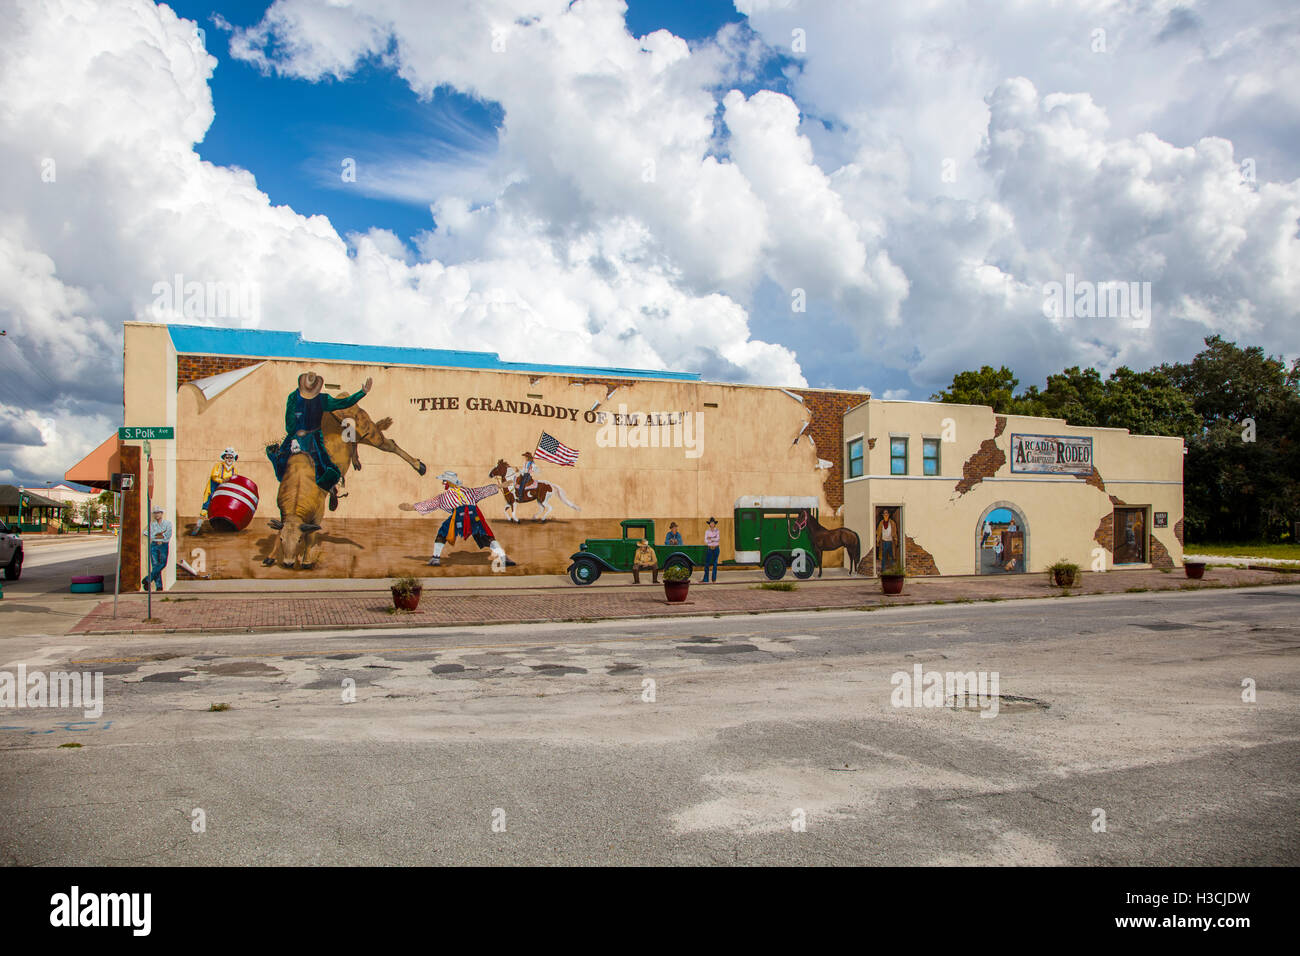 Rodeo wall mural painting on side of building in Arcadia Florida Stock Photo